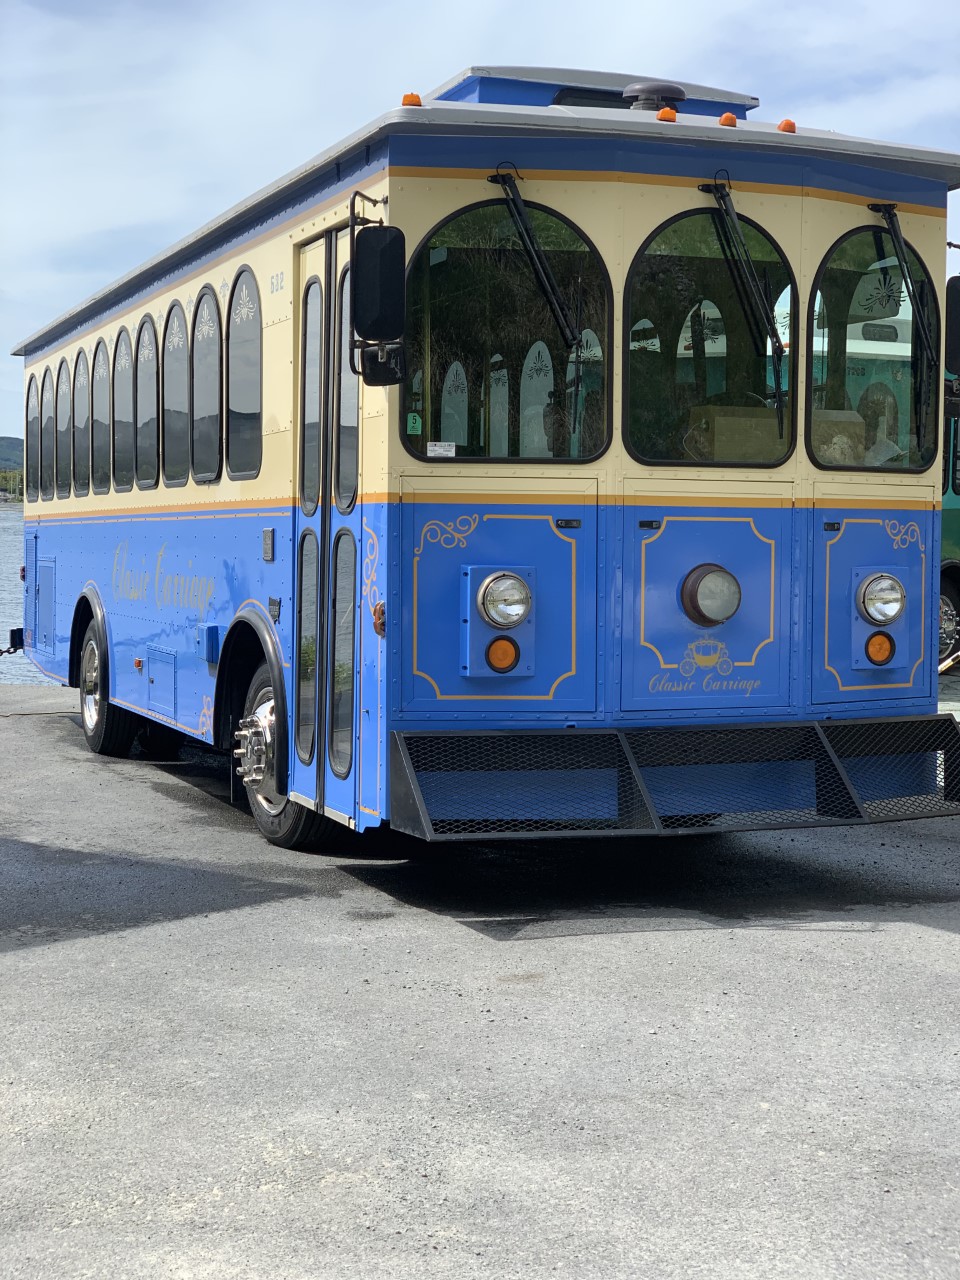 Classic Carriage Trolley, Vintage Newfoundland Tours, St. Johns trolley bus